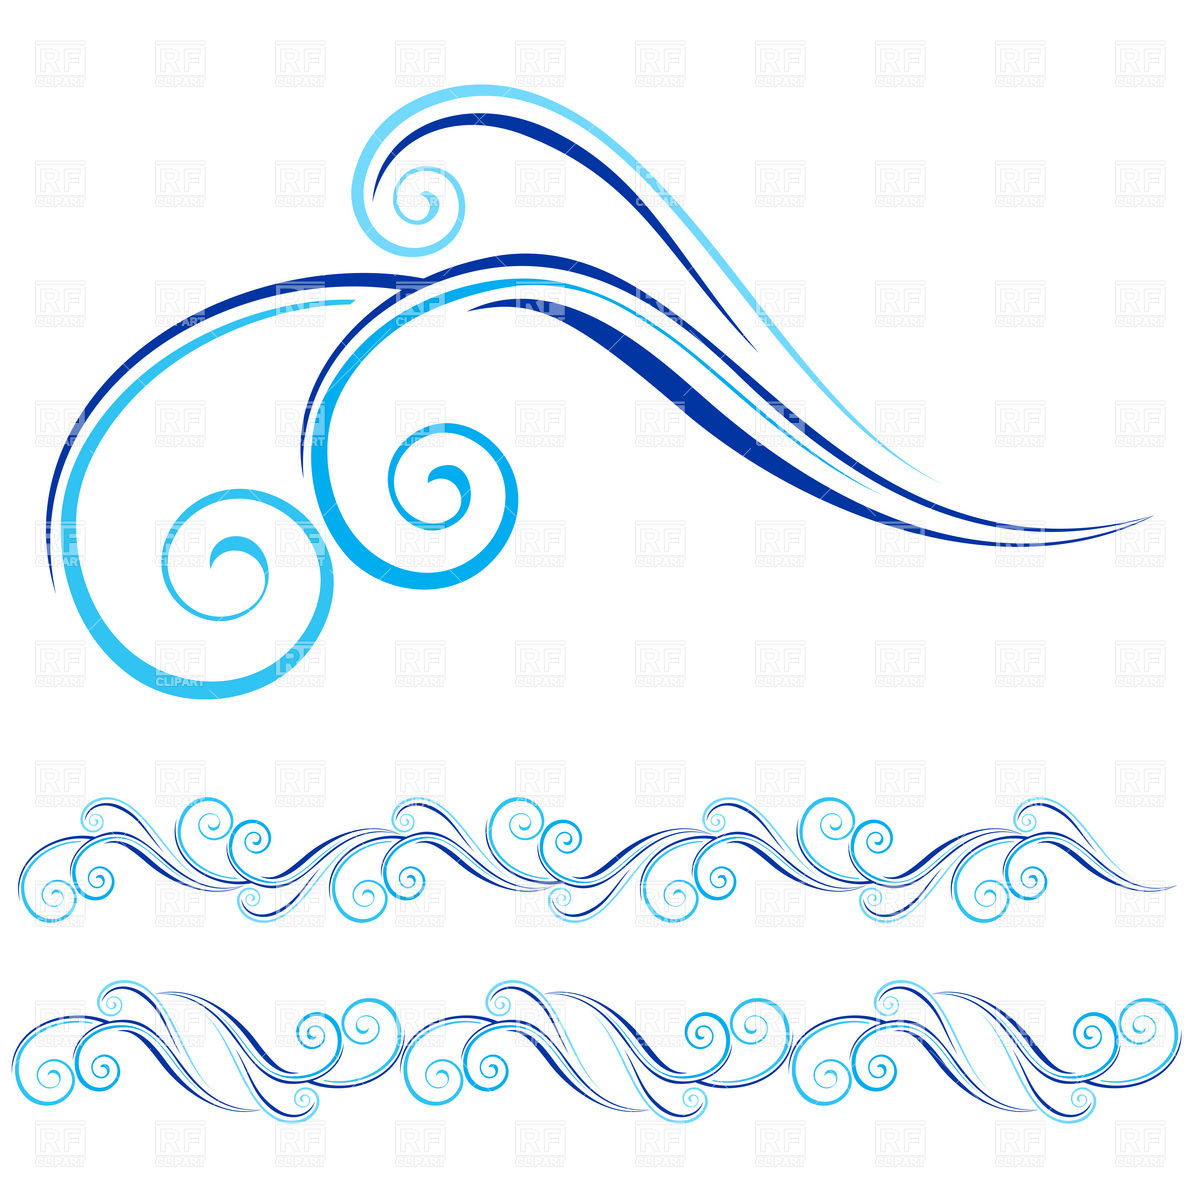 Blue Wave Design 8525 Download Royalty Free Vector Clipart  Eps